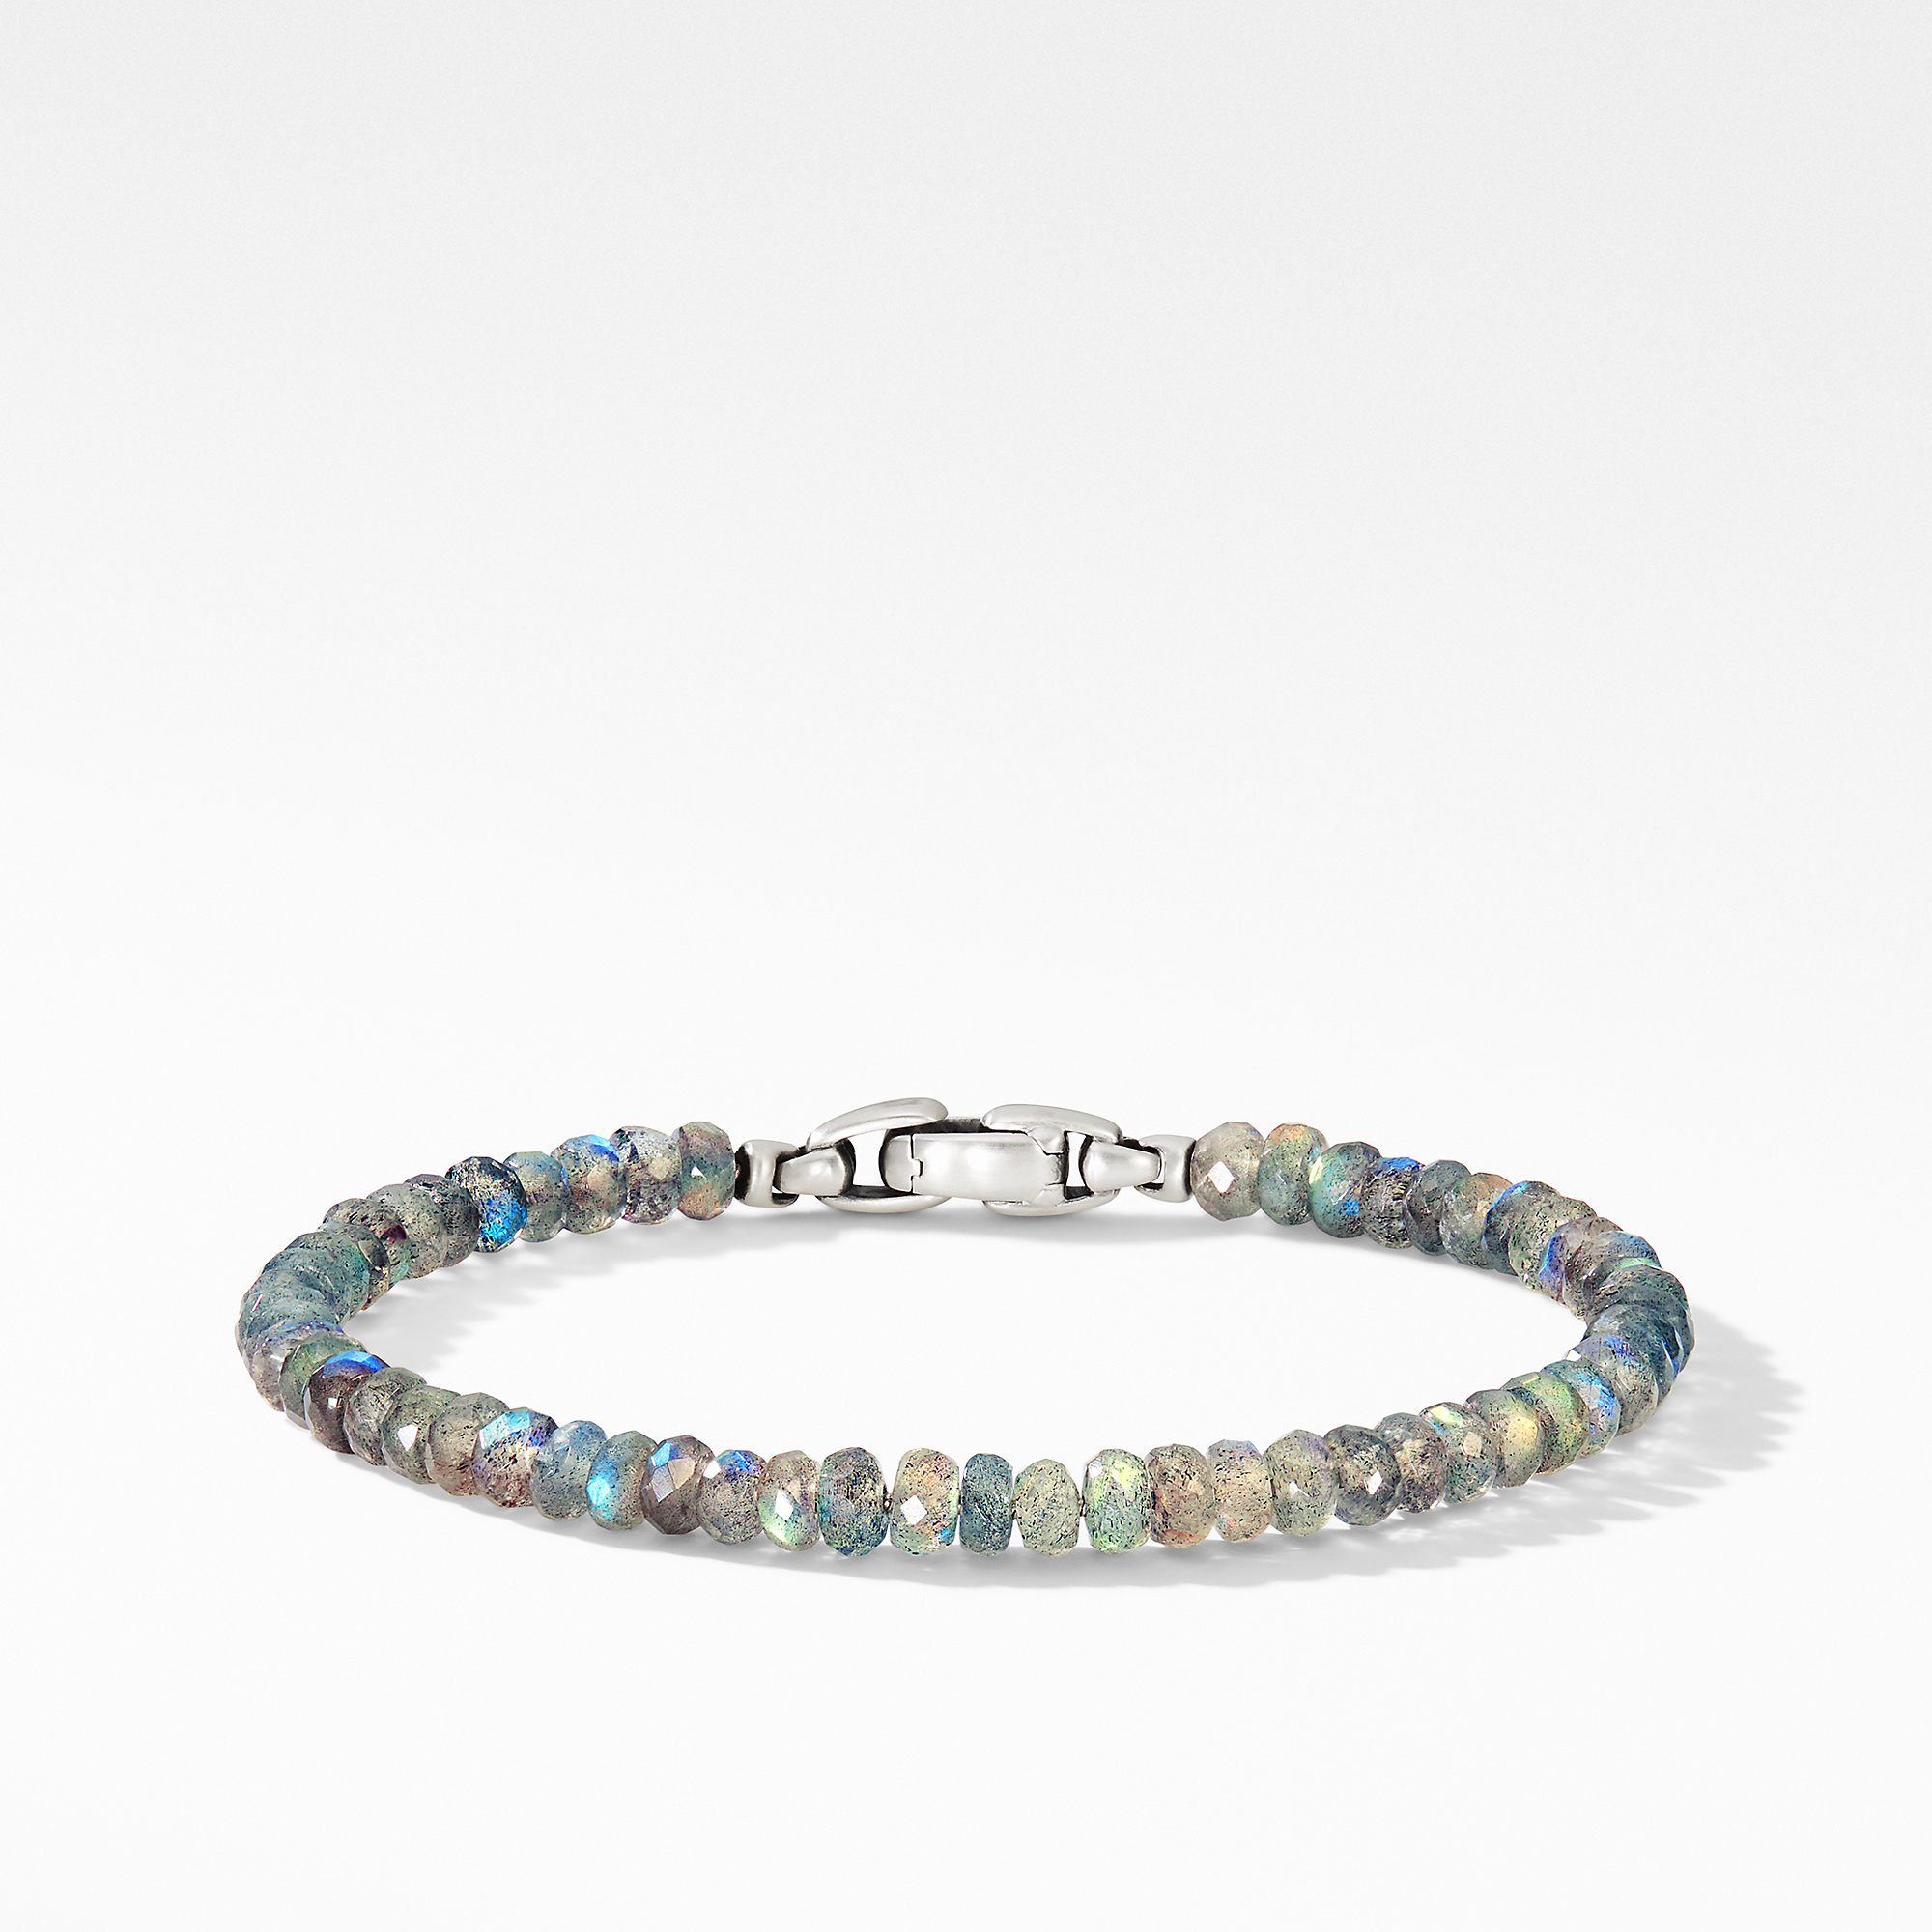 Spiritual Beads Faceted Bracelet in Sterling Silver with Labradorite